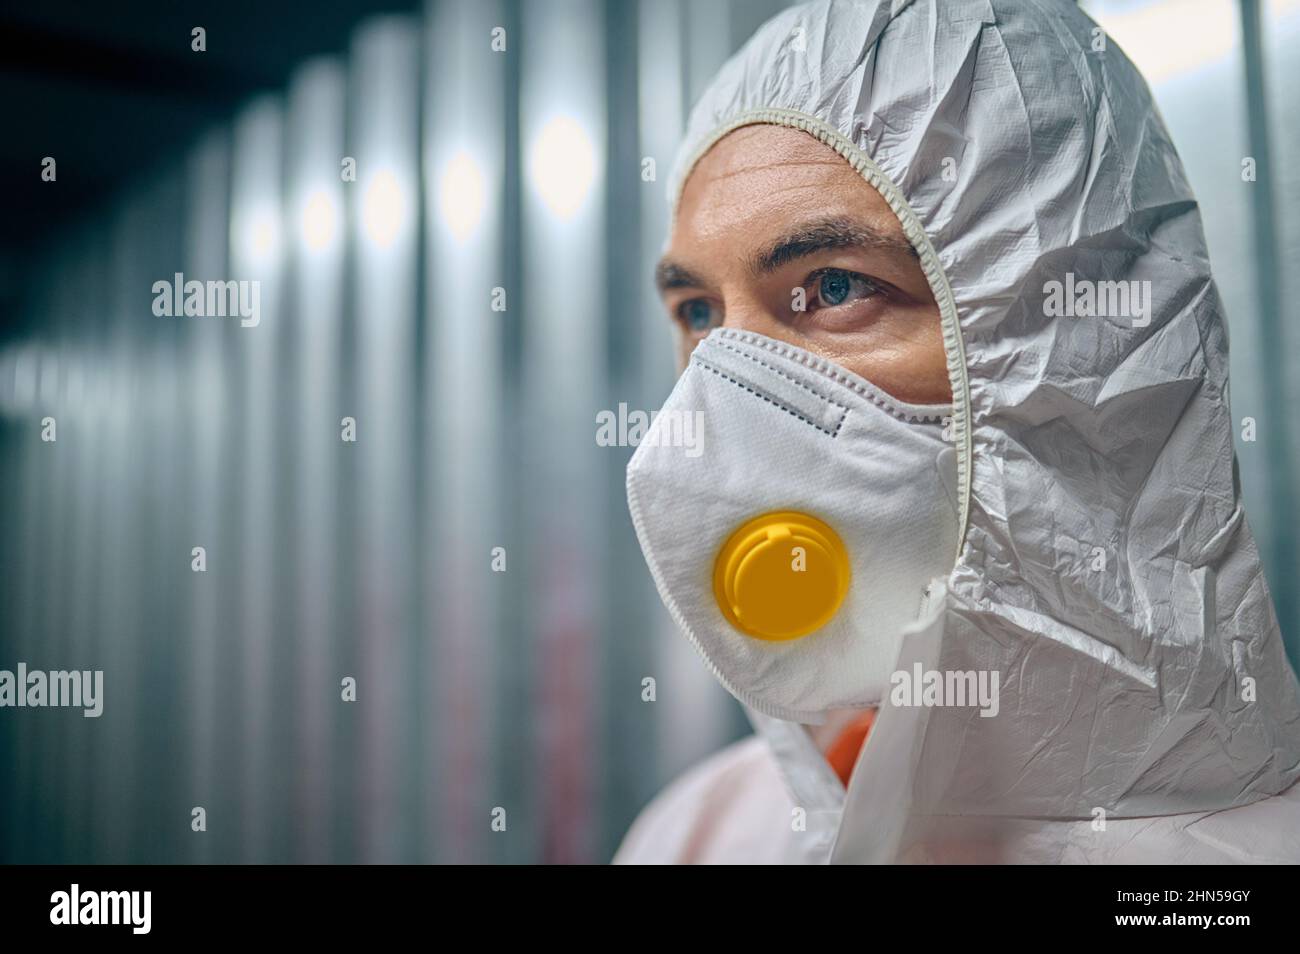 Man in the protective gear staring into the distance Stock Photo